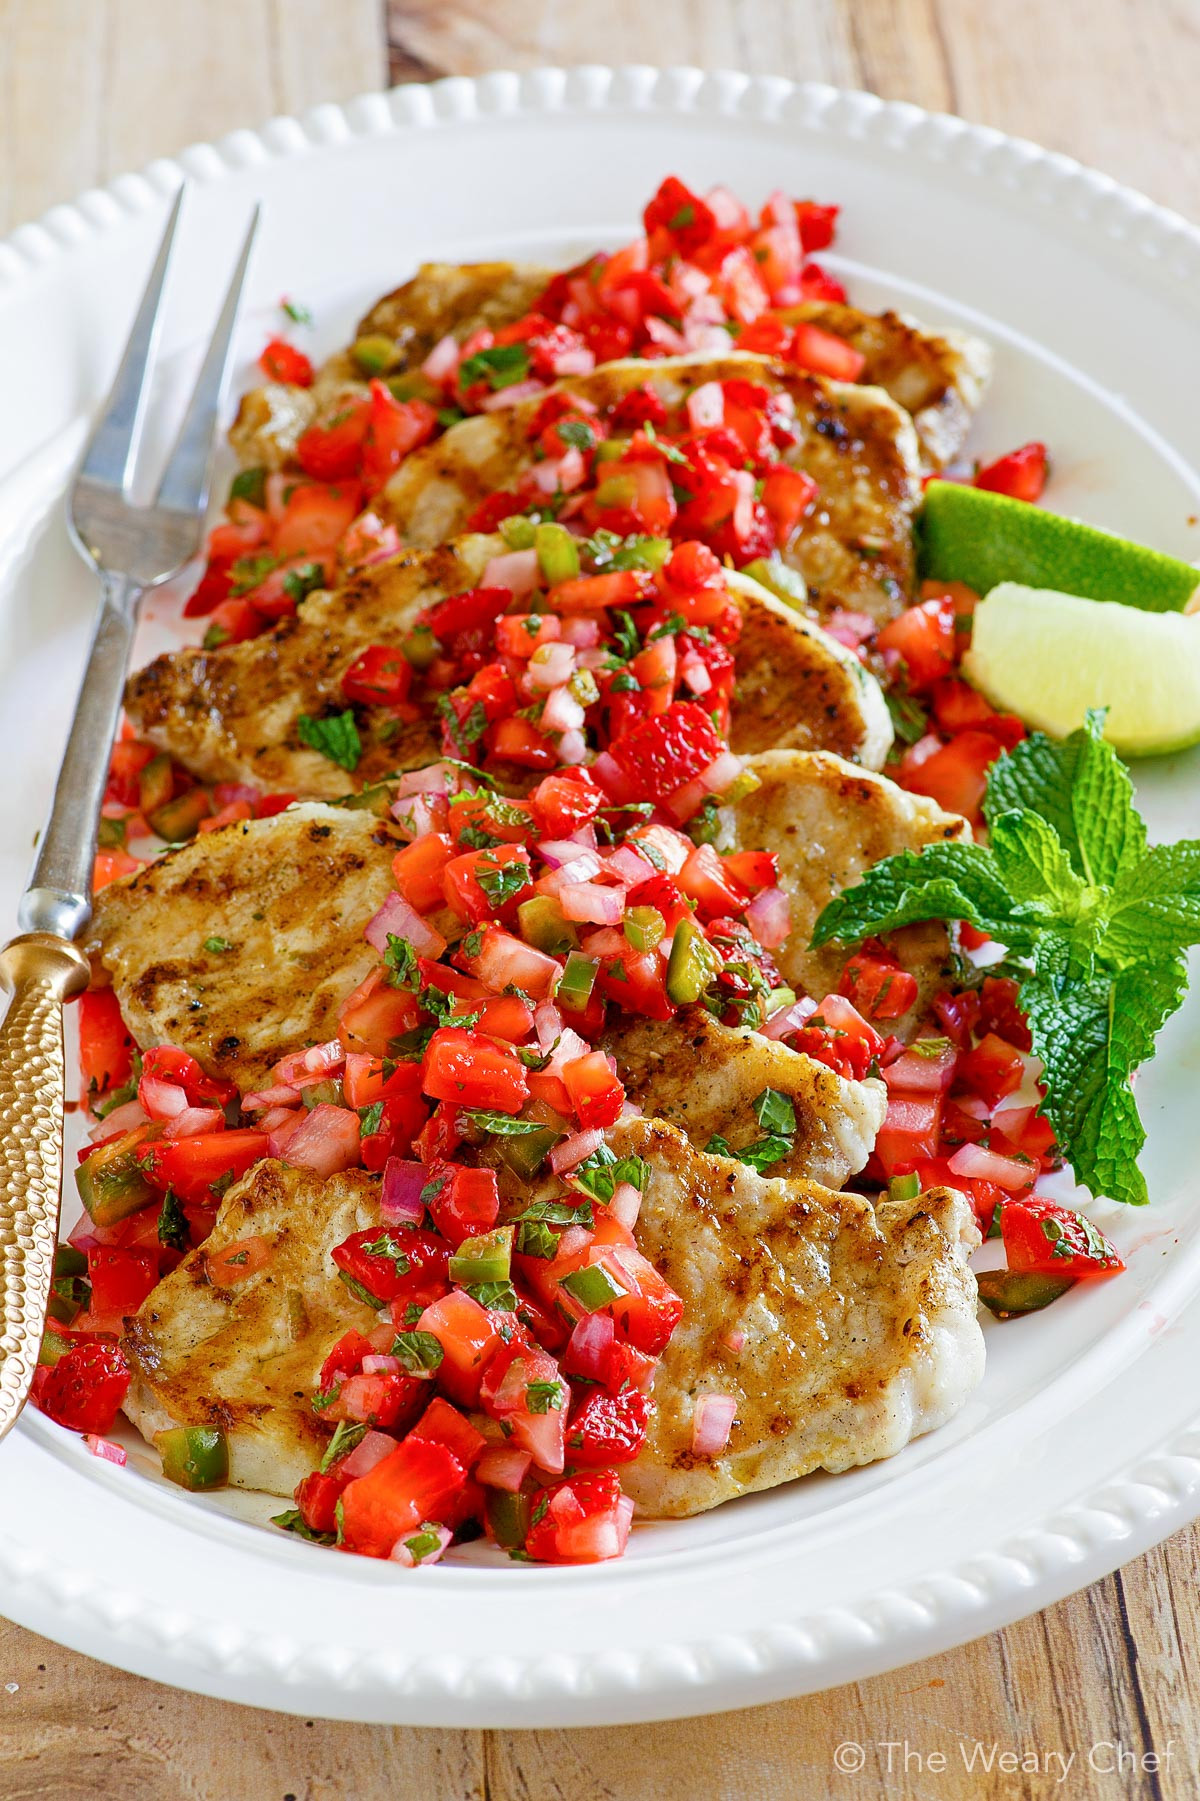 Grilled Pork Loin Chops
 Grilled Pork Loin Chops with Fresh Strawberry Salsa The